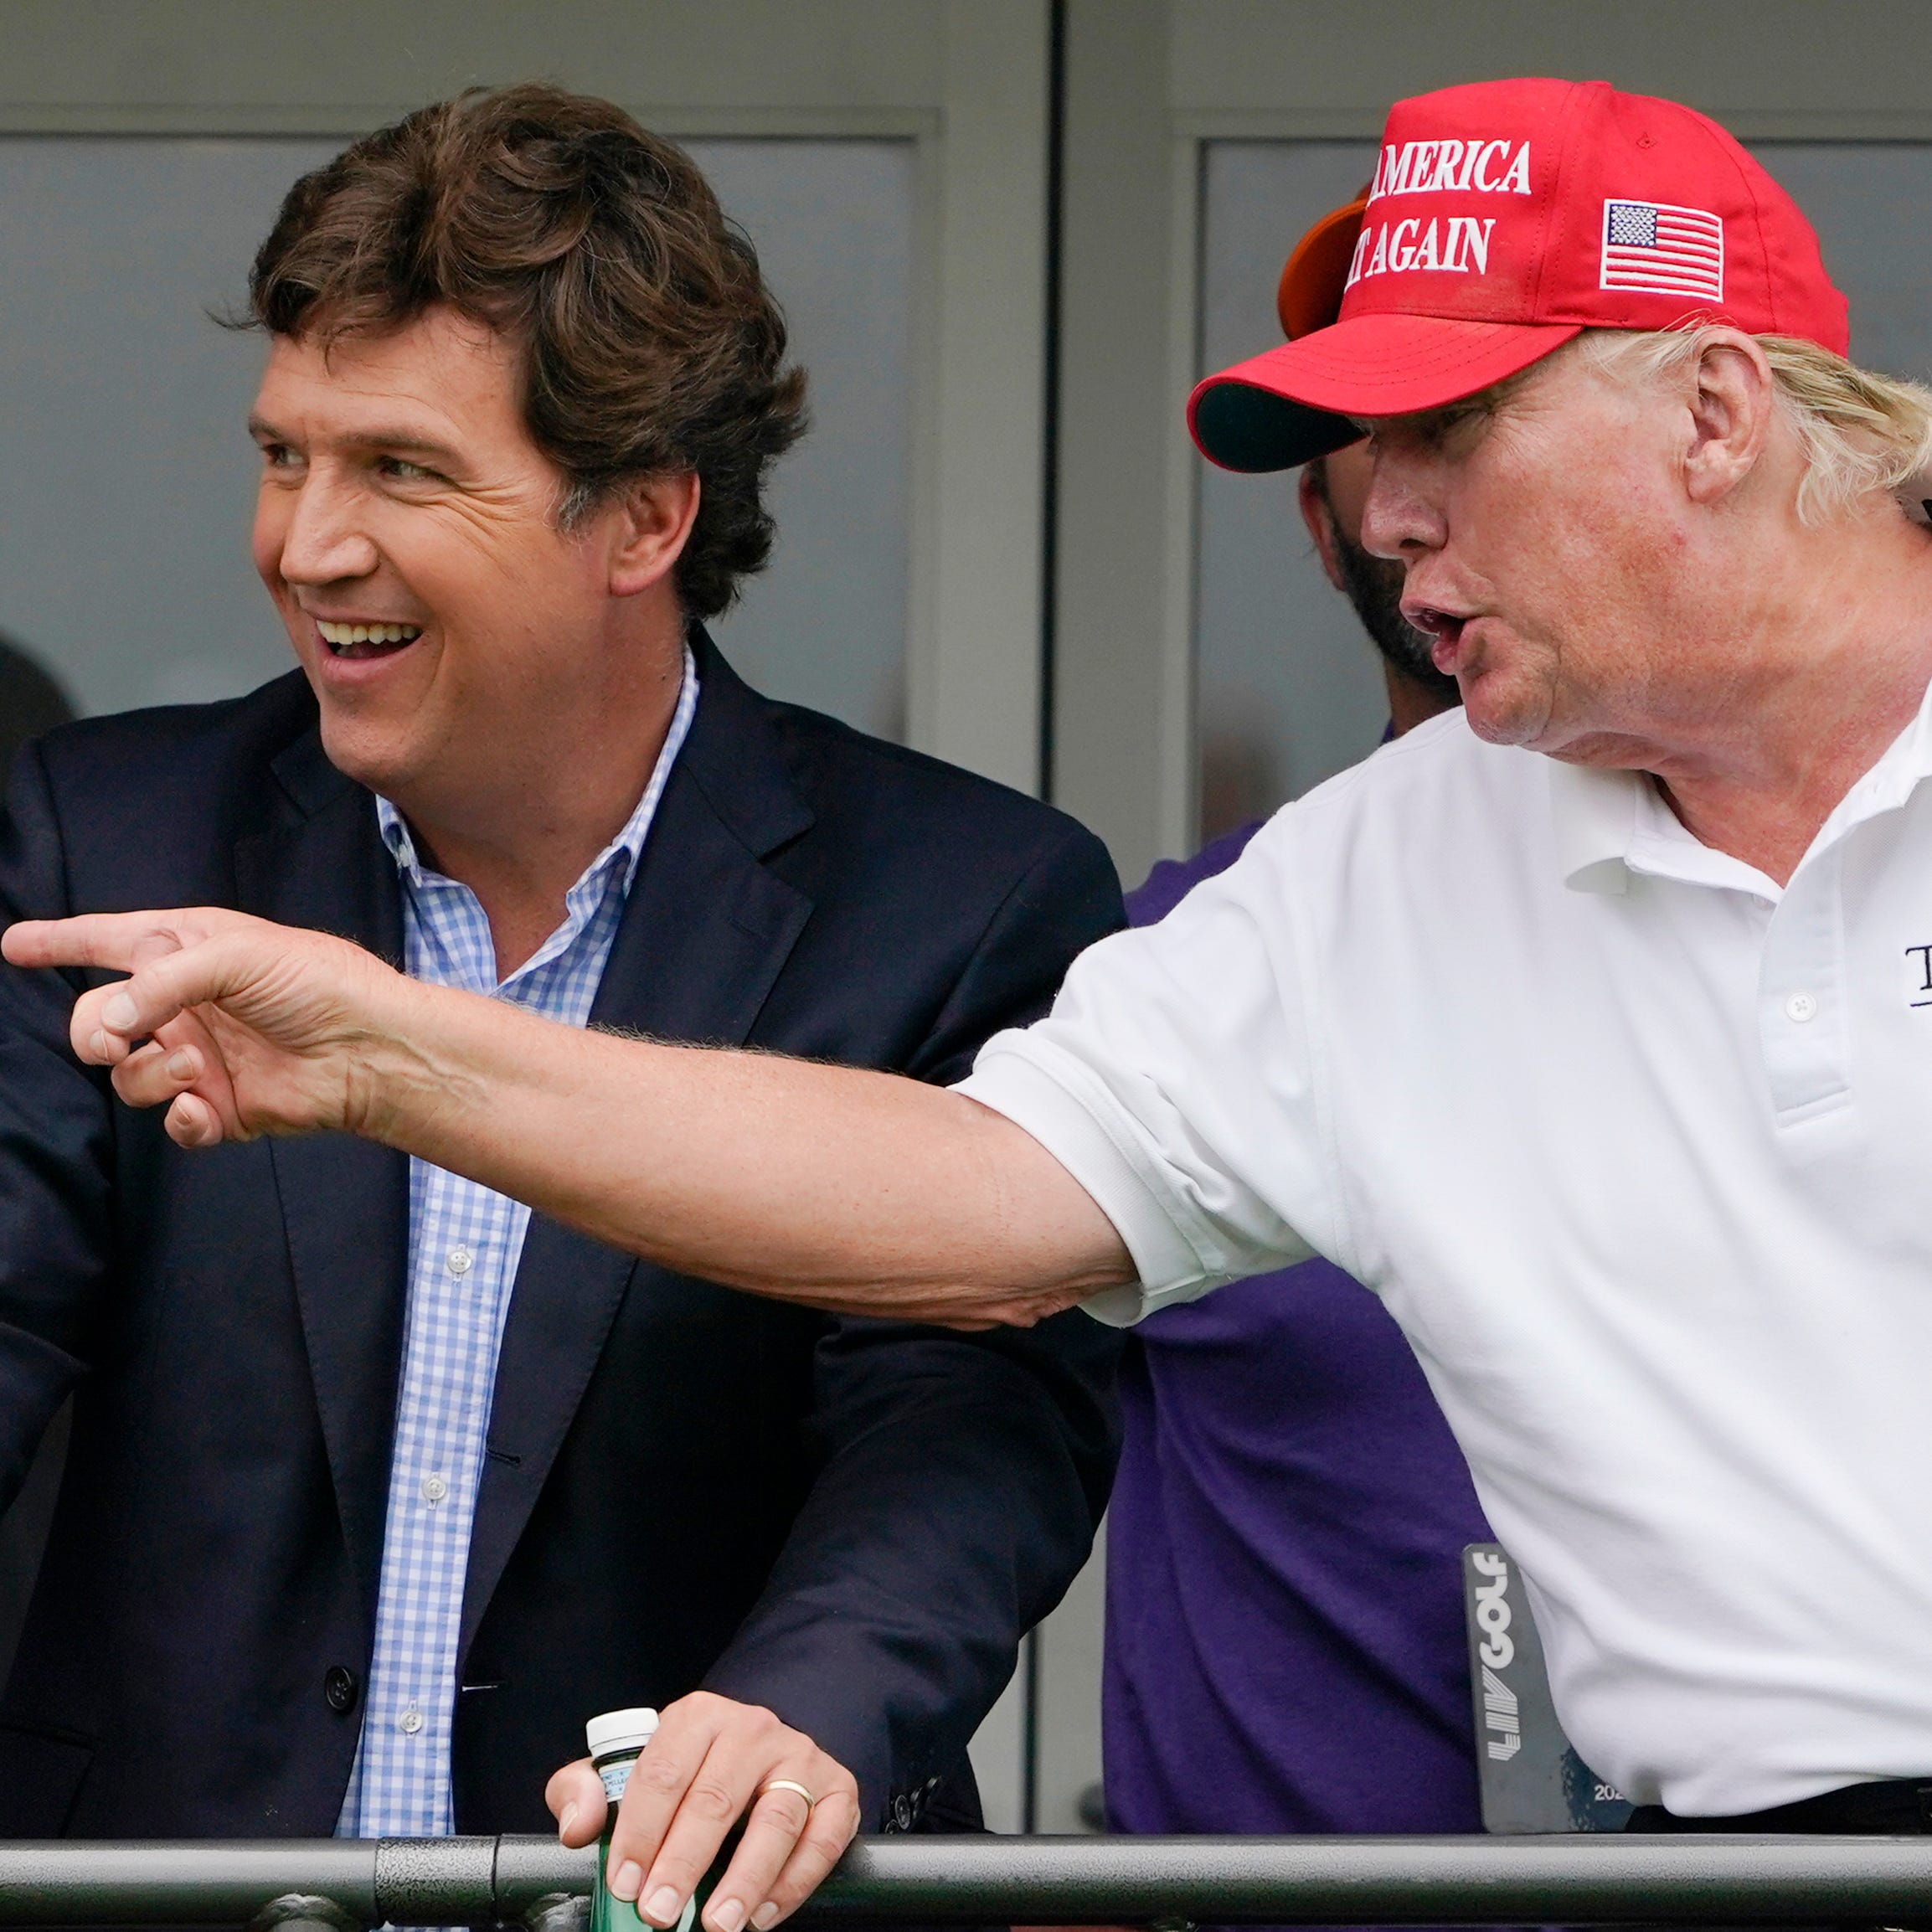 Fox News' Tucker Carlson and former President Donald Trump watch the LIV Golf Invitational at the Trump National Golf Club in Bedminster, N.J., on July 31, 2022.